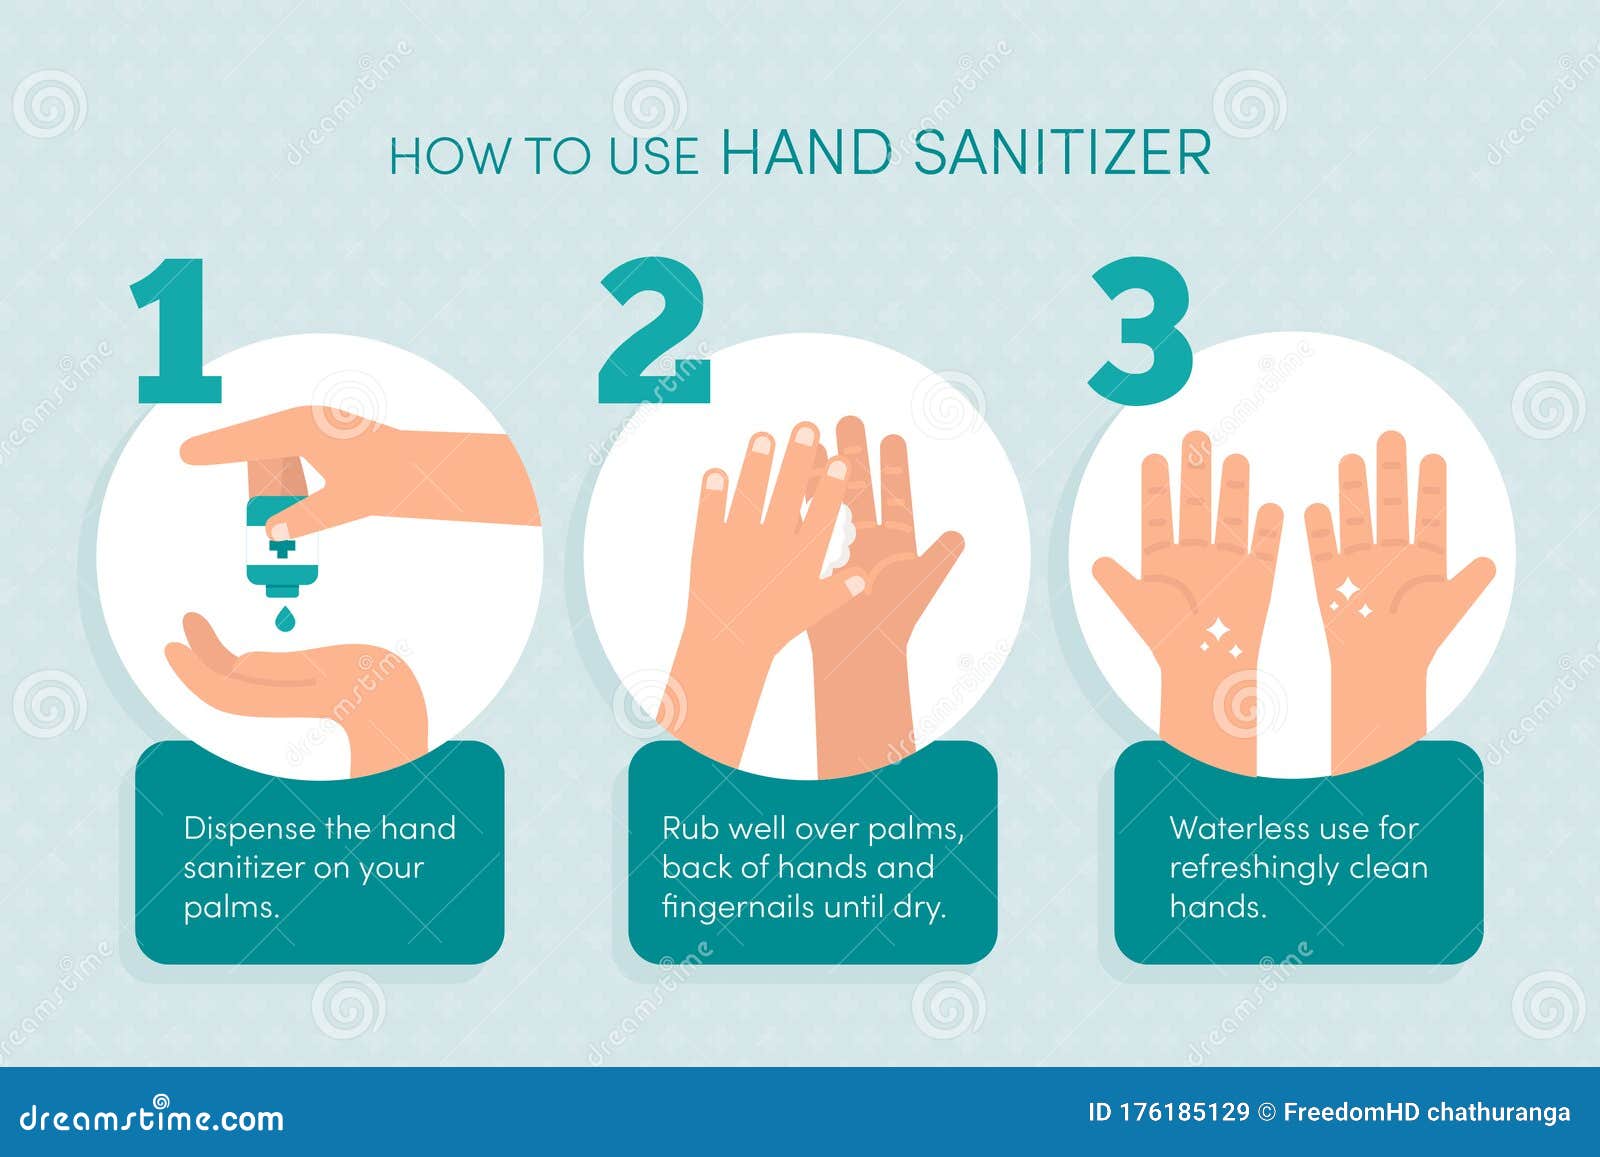 how to use hand sanitizer instructions